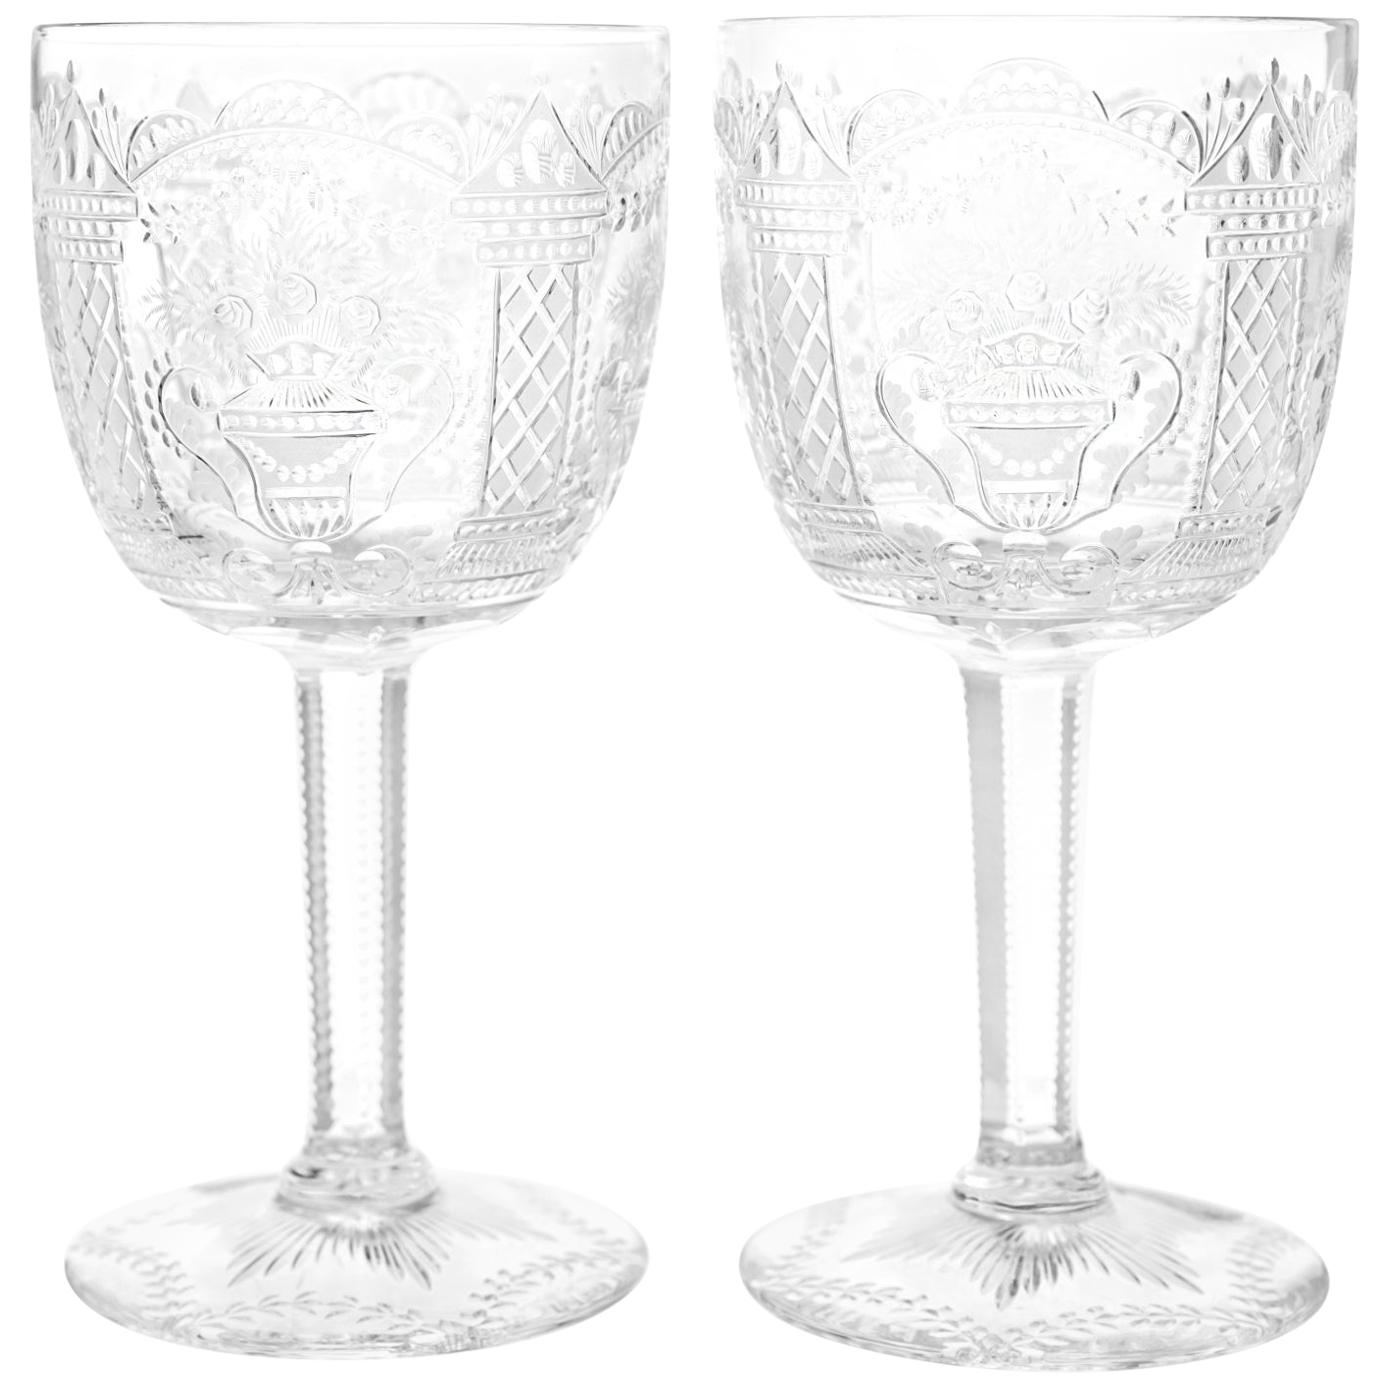 One-of-a-Kind Set of 12 Cut Crystal Goblets by Erwin Krause for Tharaud Designs